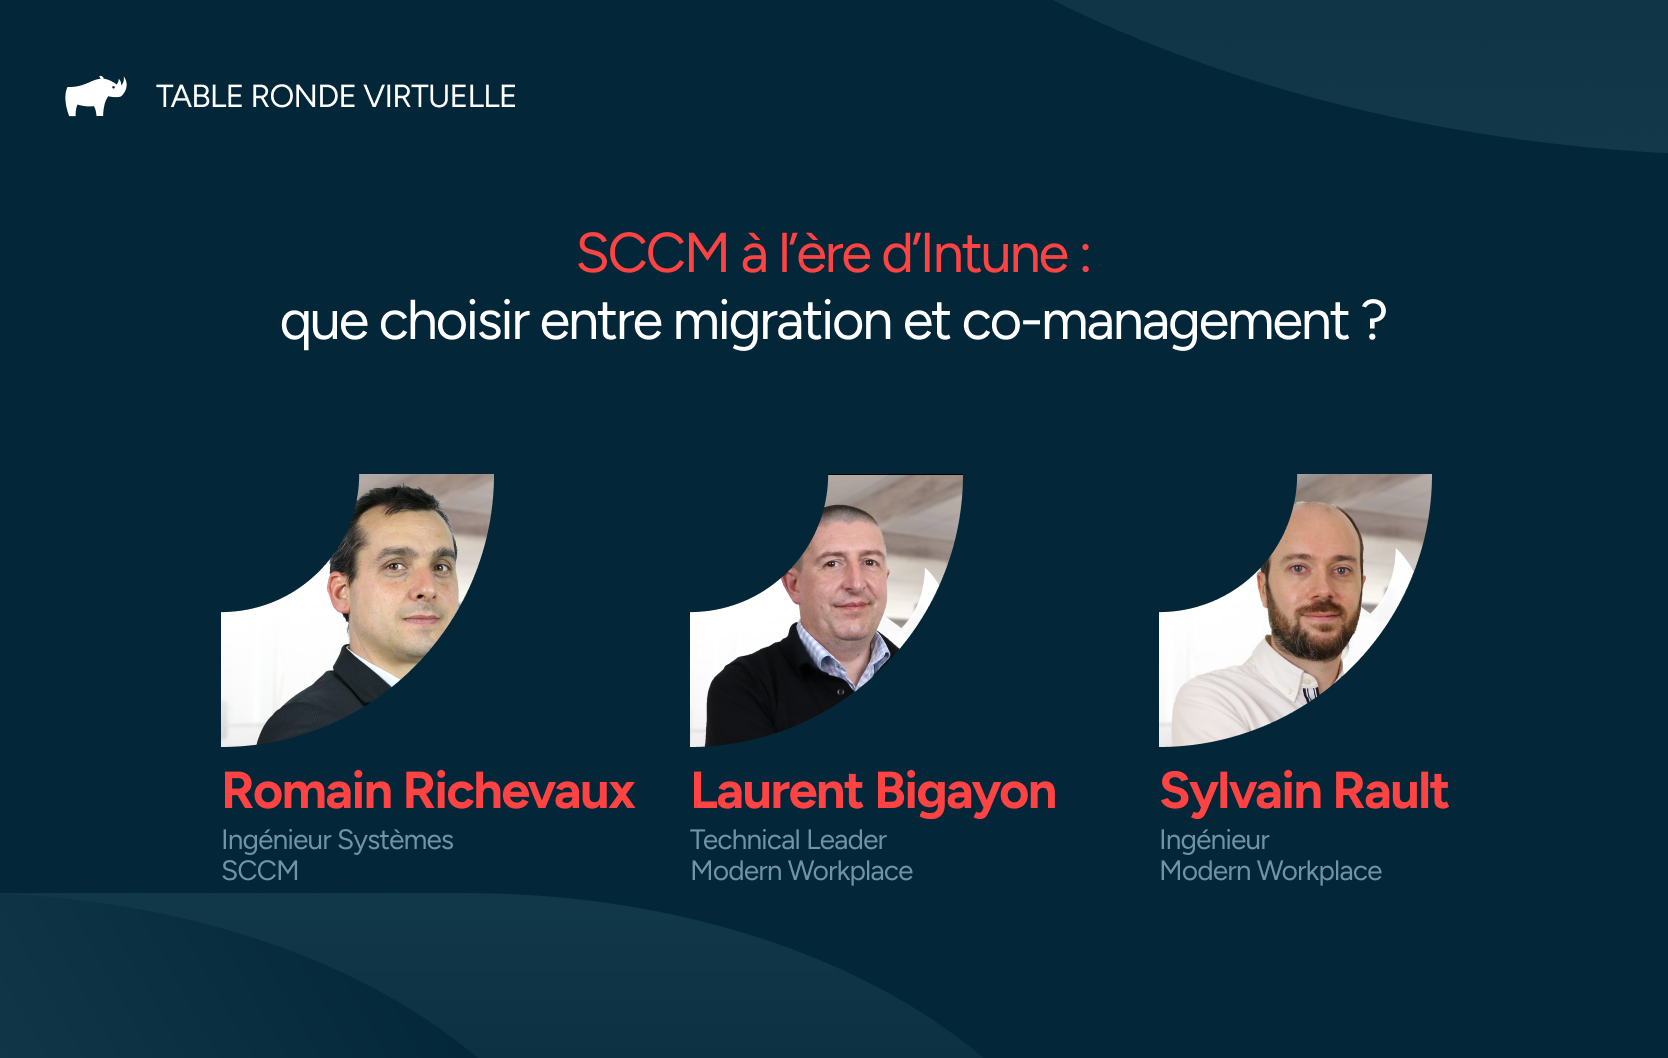 Table ronde SCCM Intune